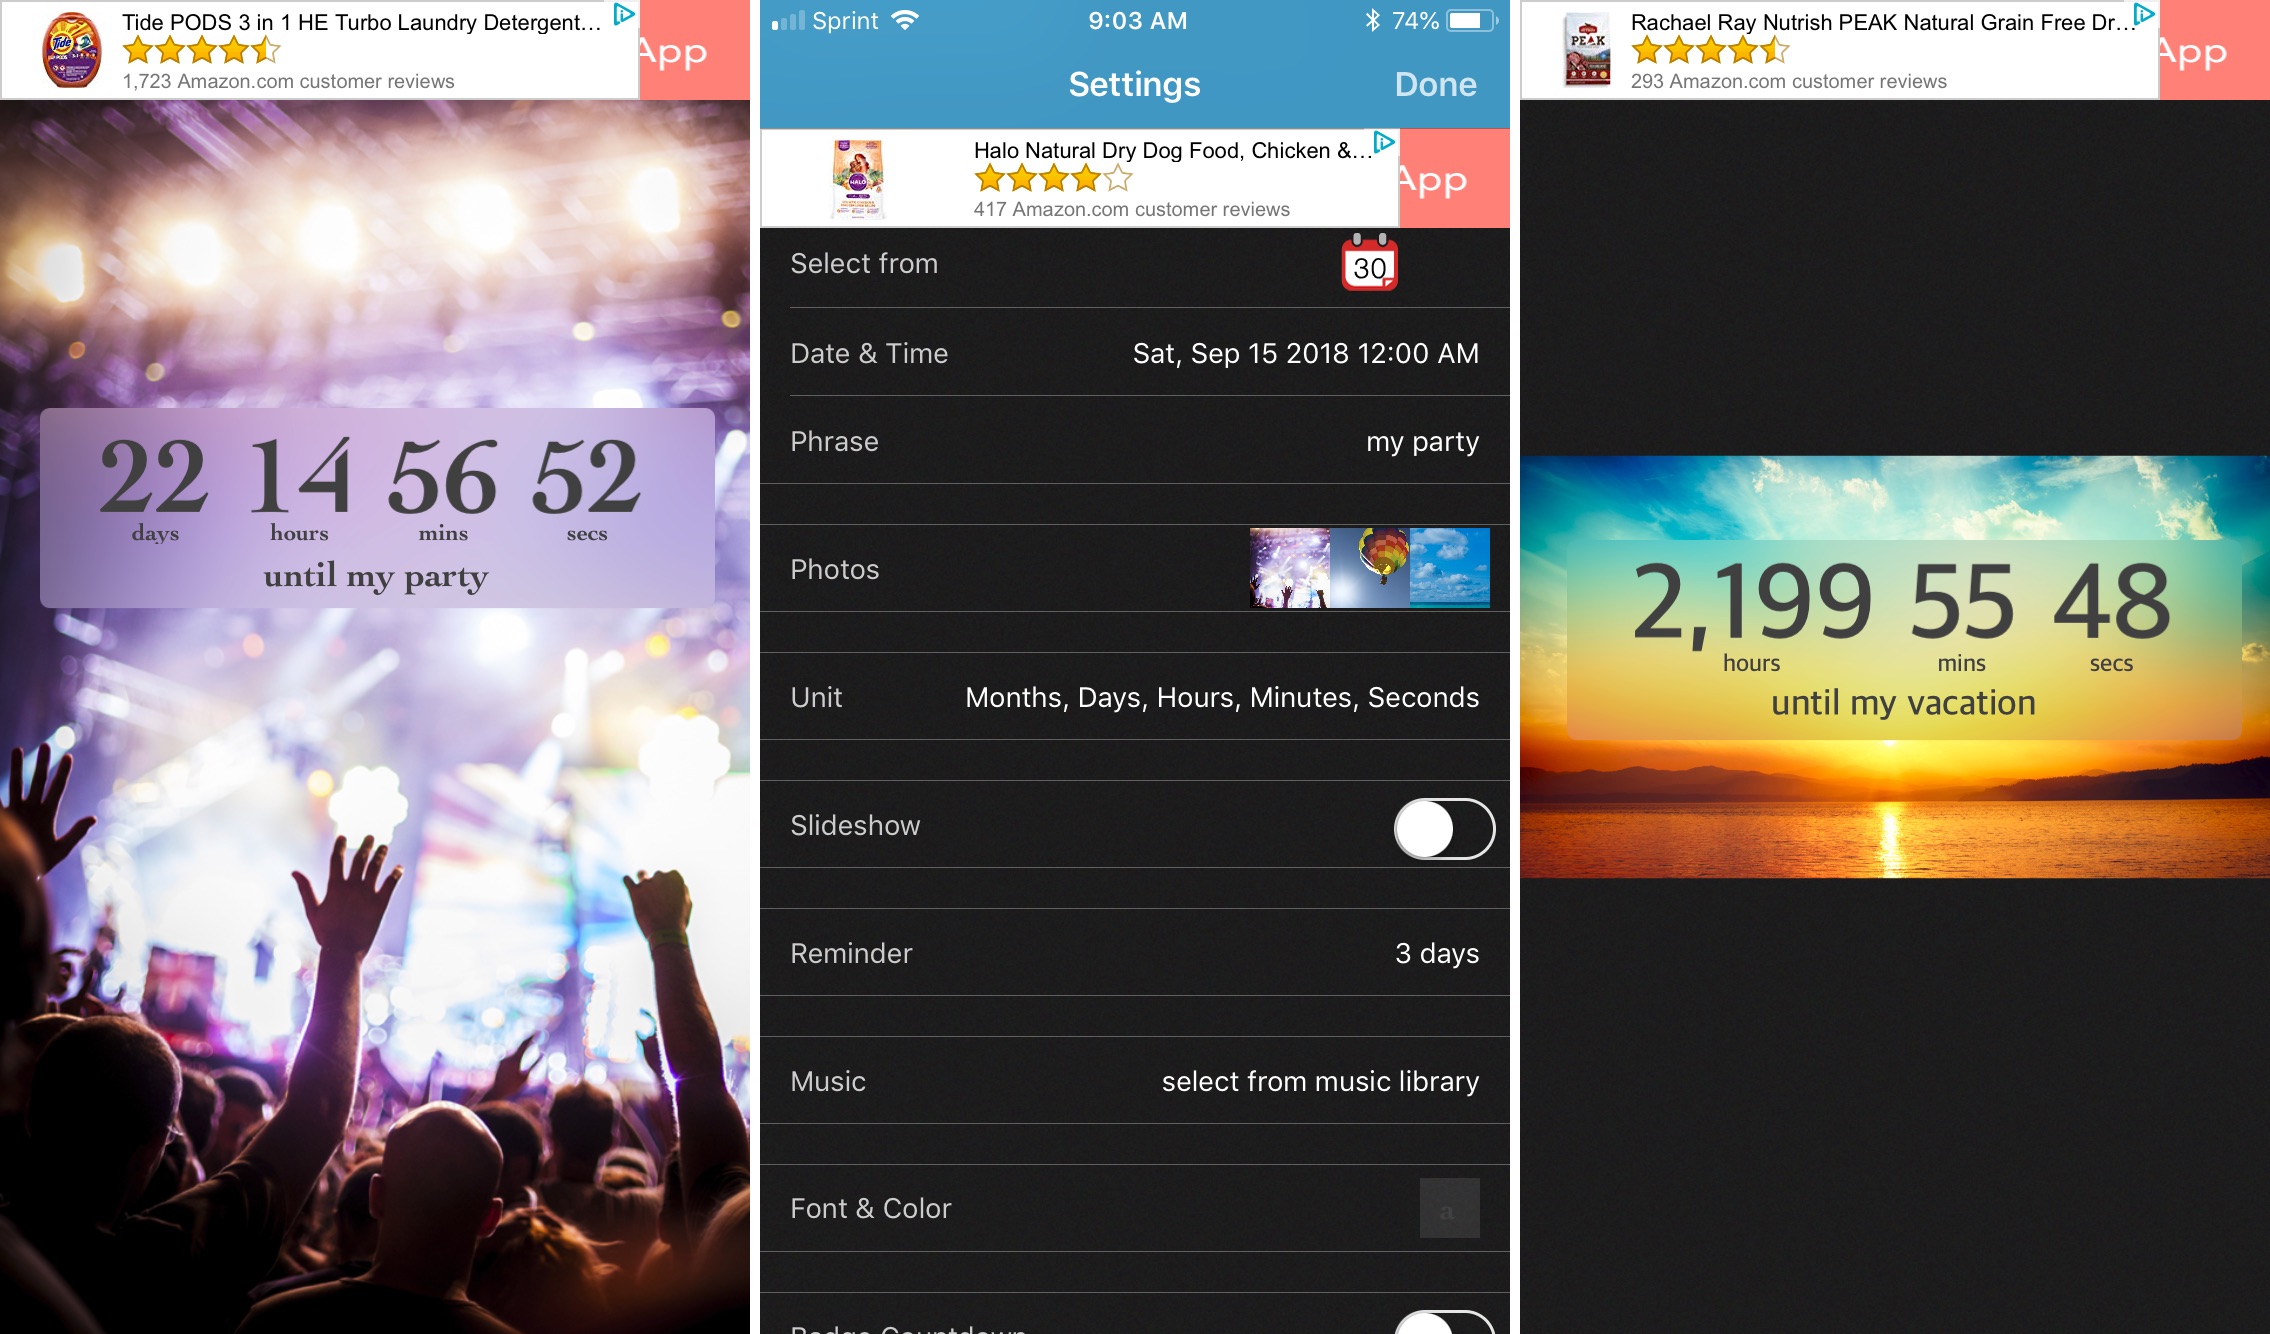 The 6 best countdown apps for iPhone and iPad